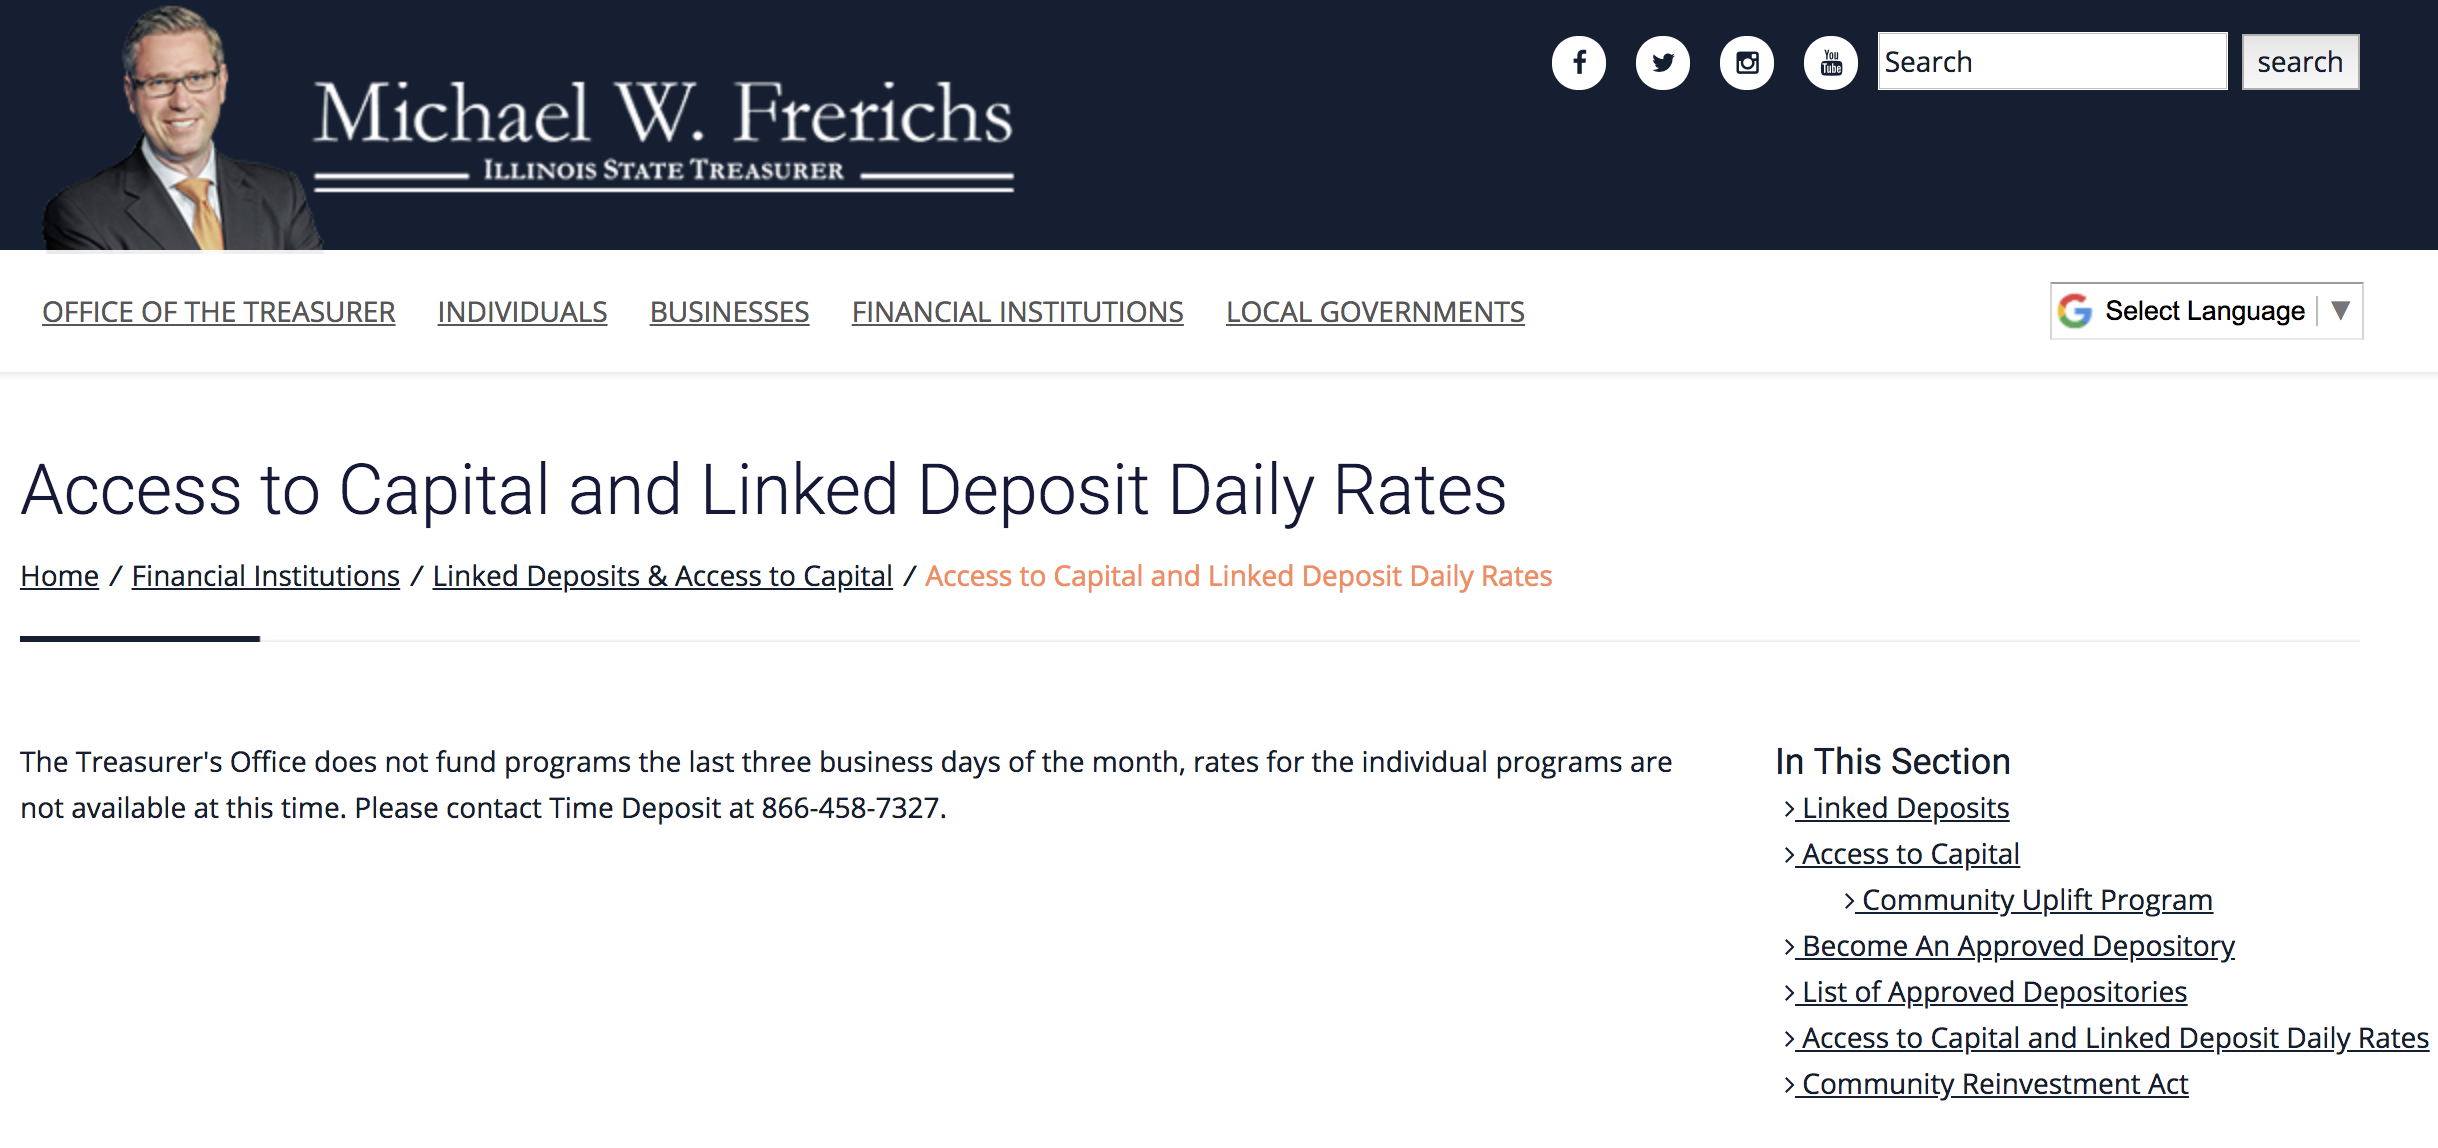 Access to Capital & Linked Deposits Daily Rates